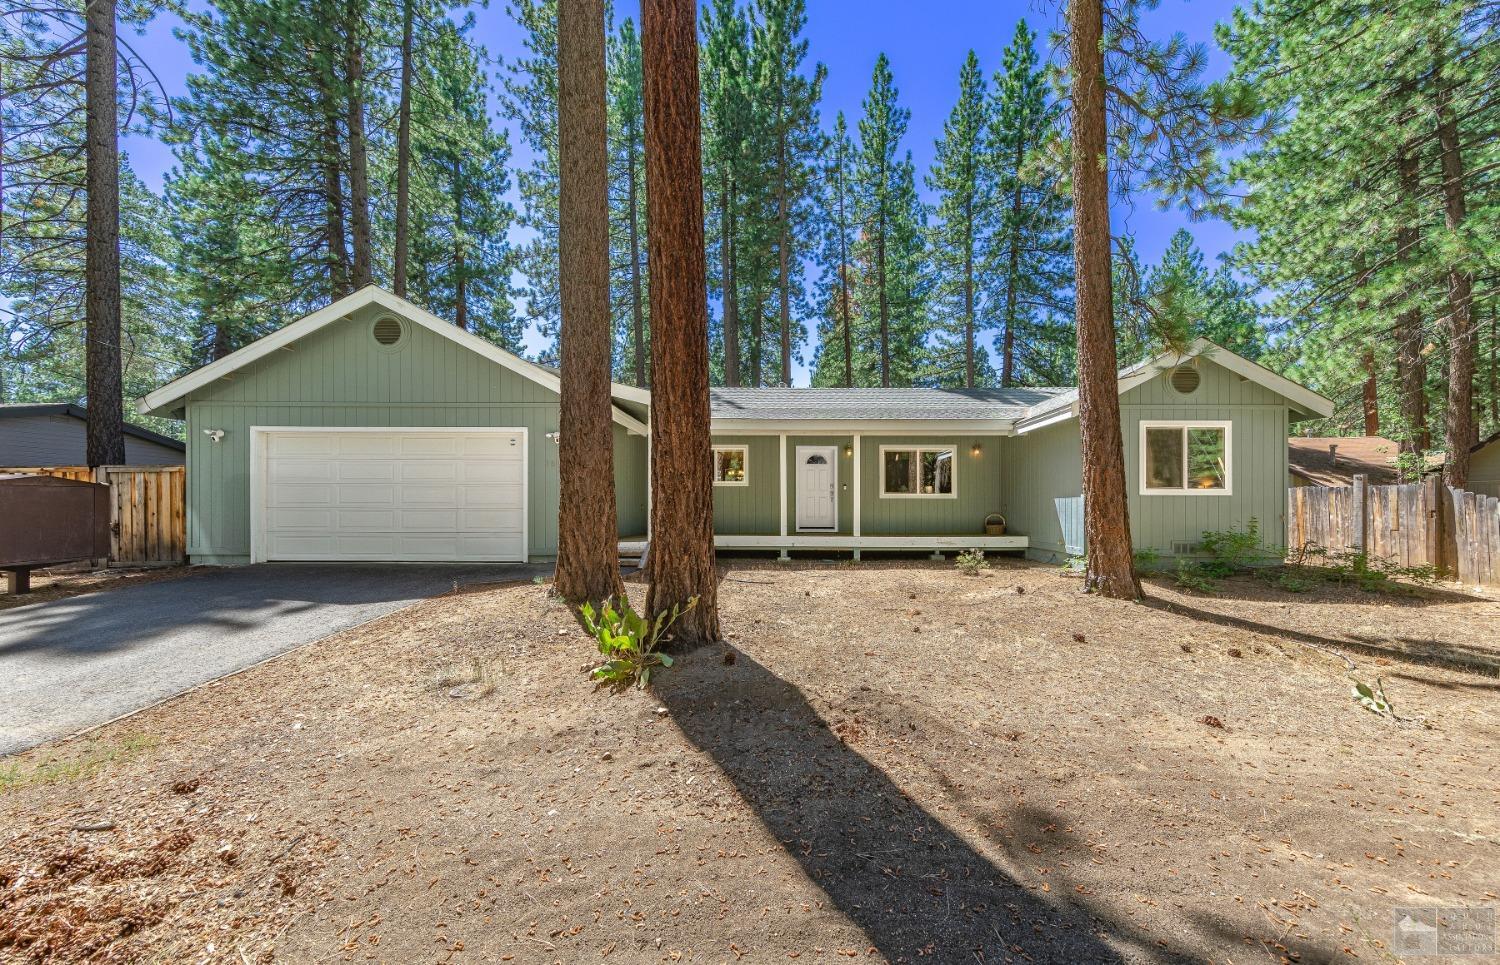 Built in 2008, this property has all the Tahoe charm with modern conveniences.